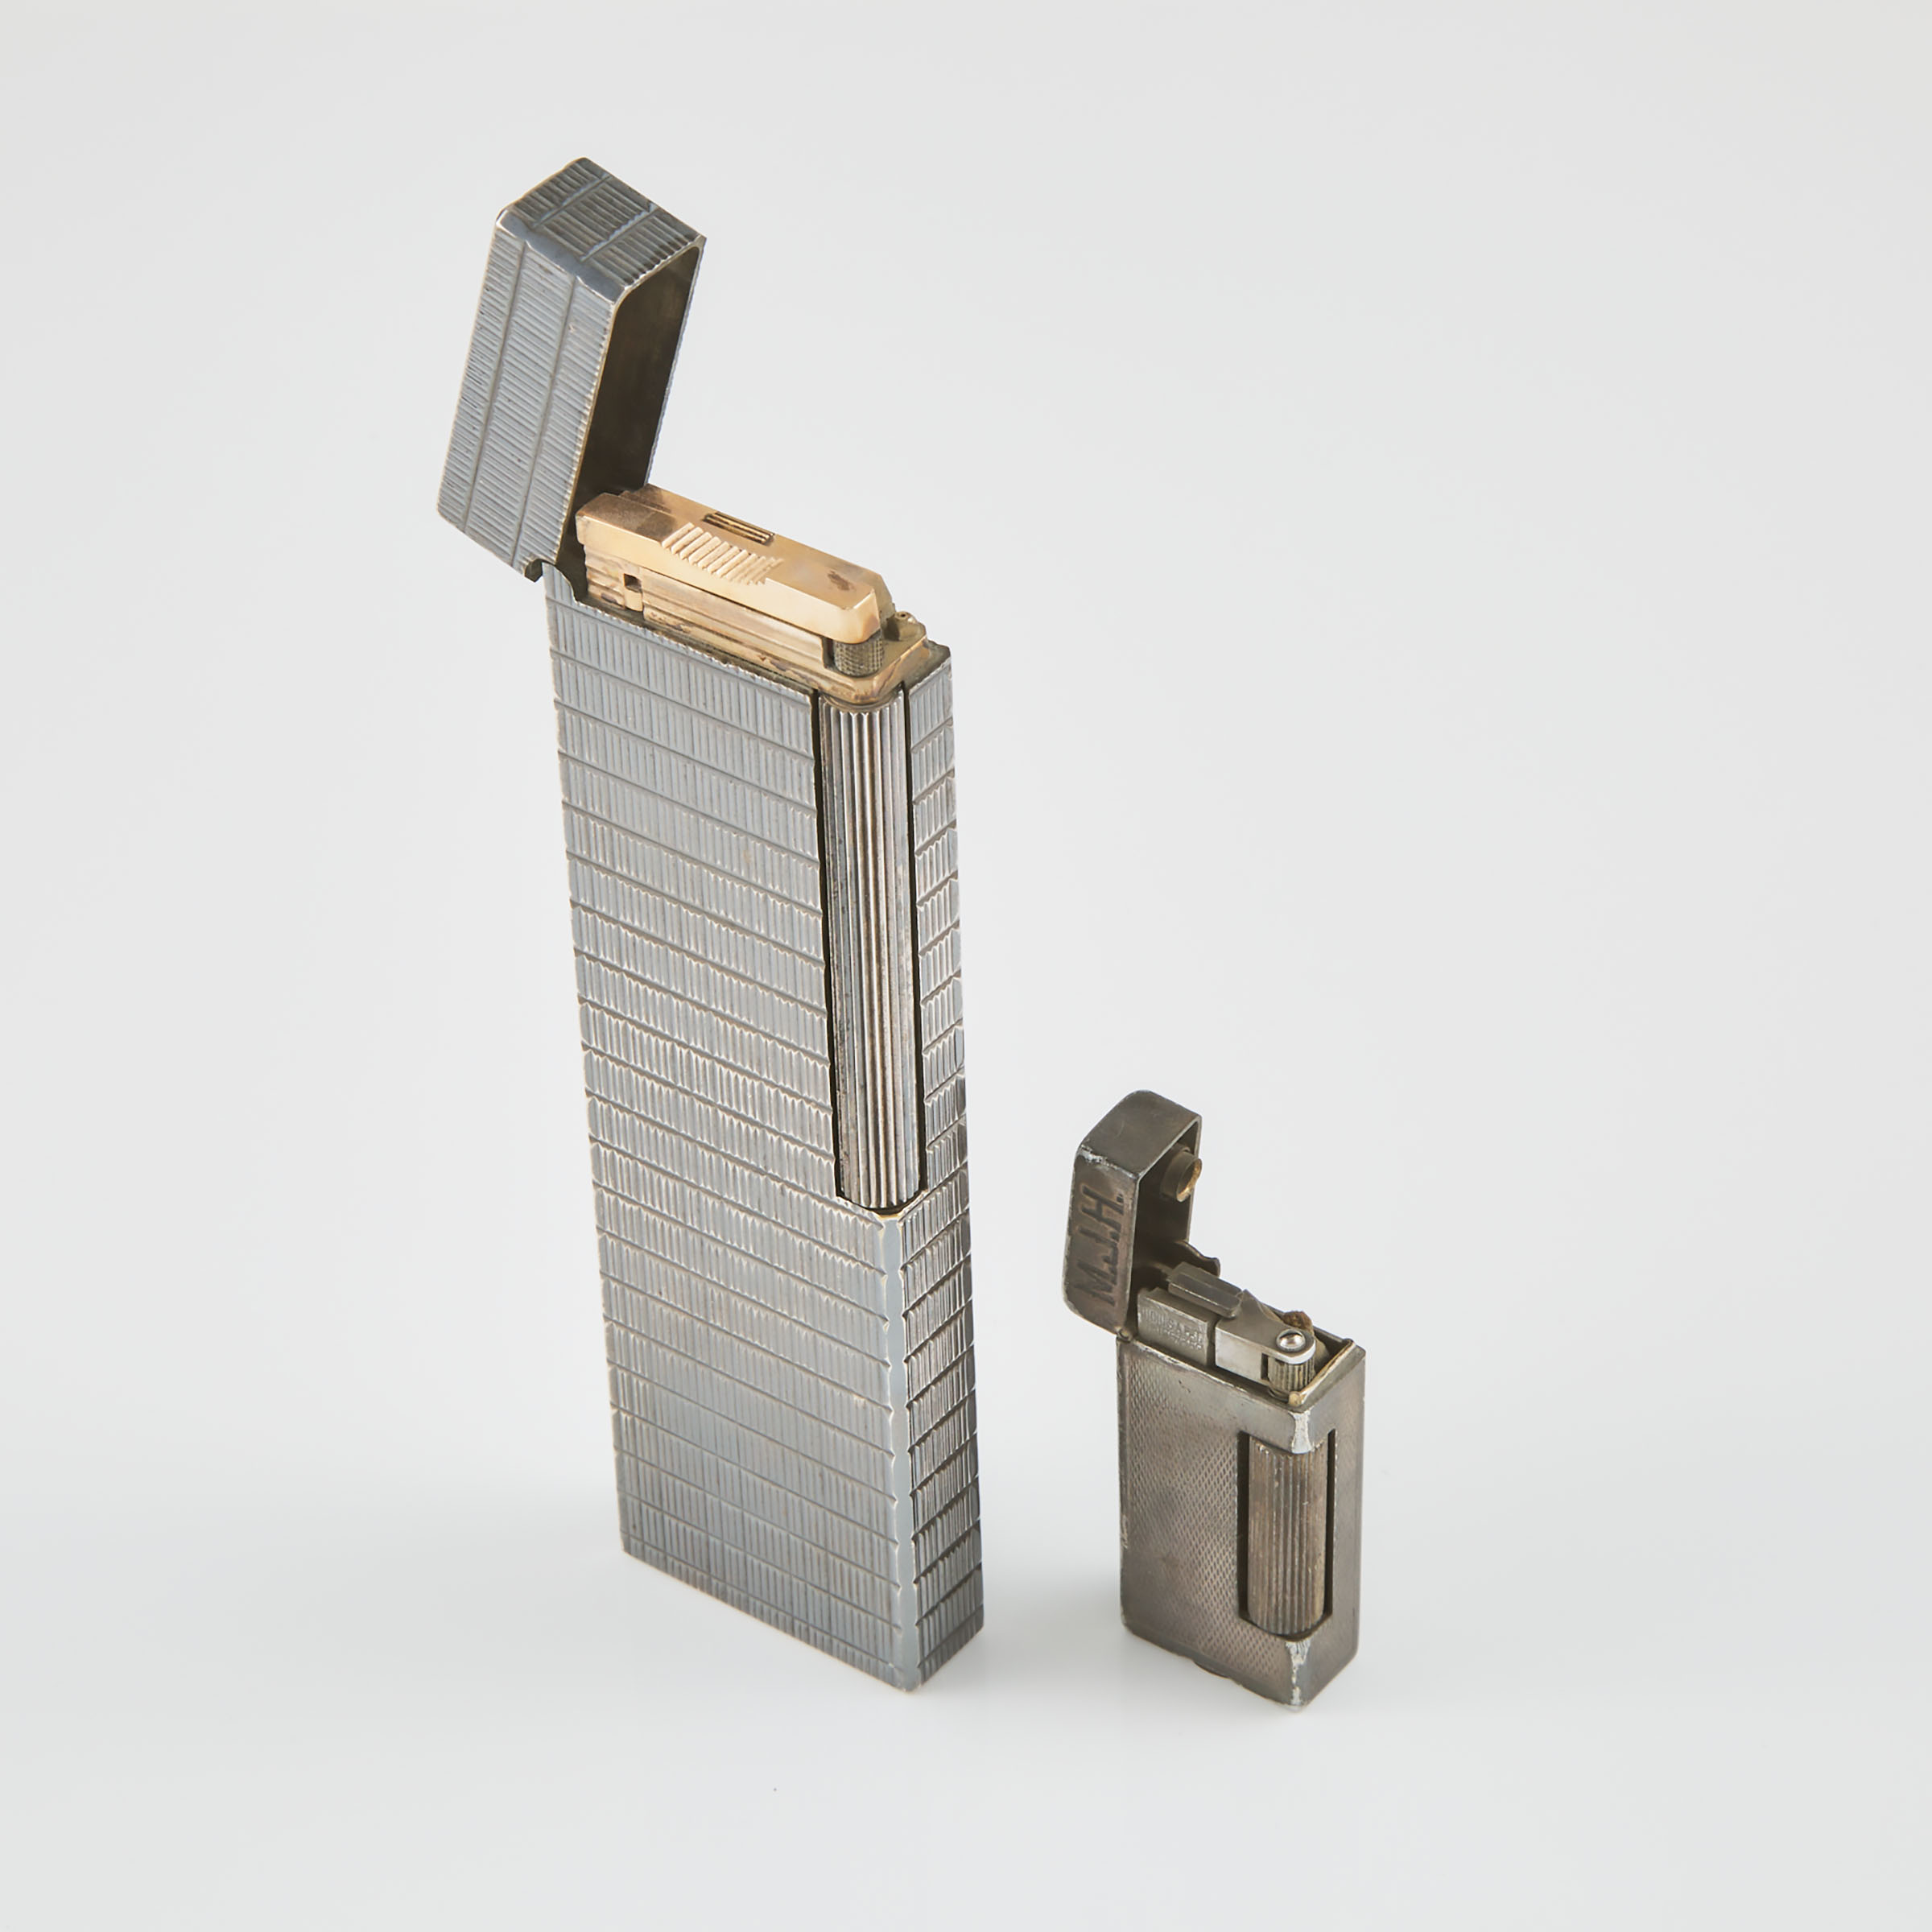 2 Silver-Plated Lighters